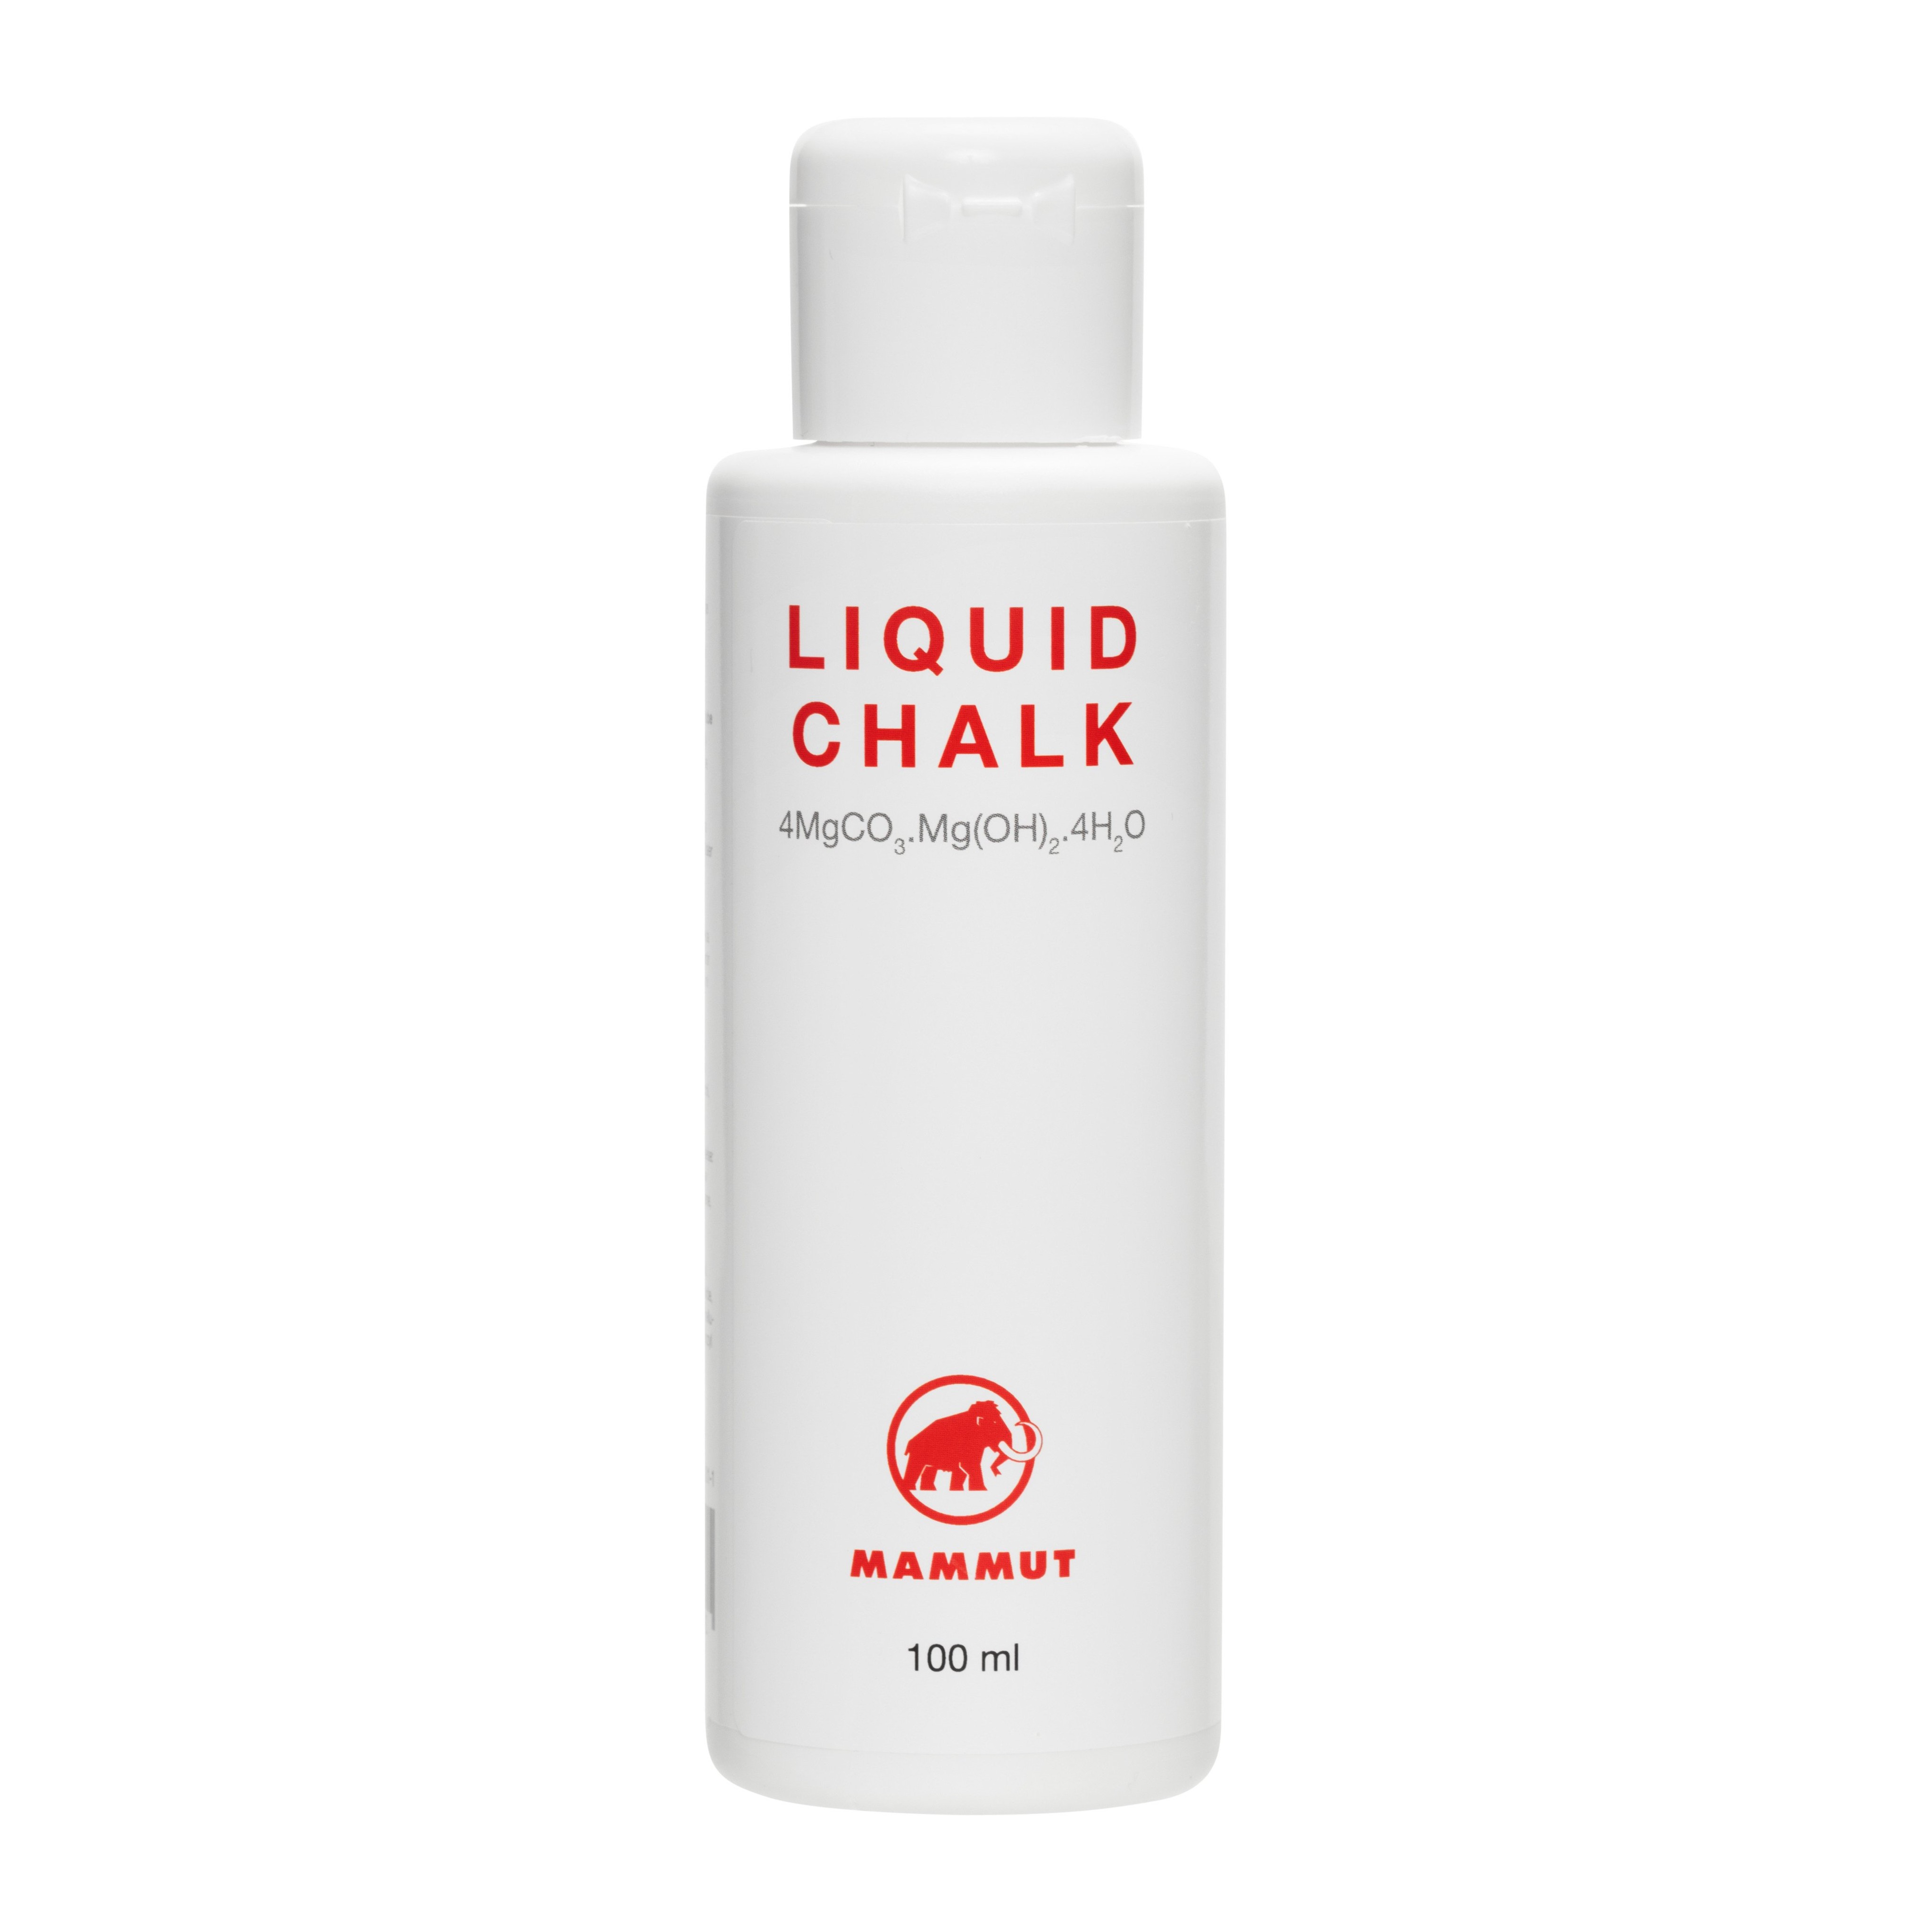 Liquid Chalk 100 ml - neutral, one size product image